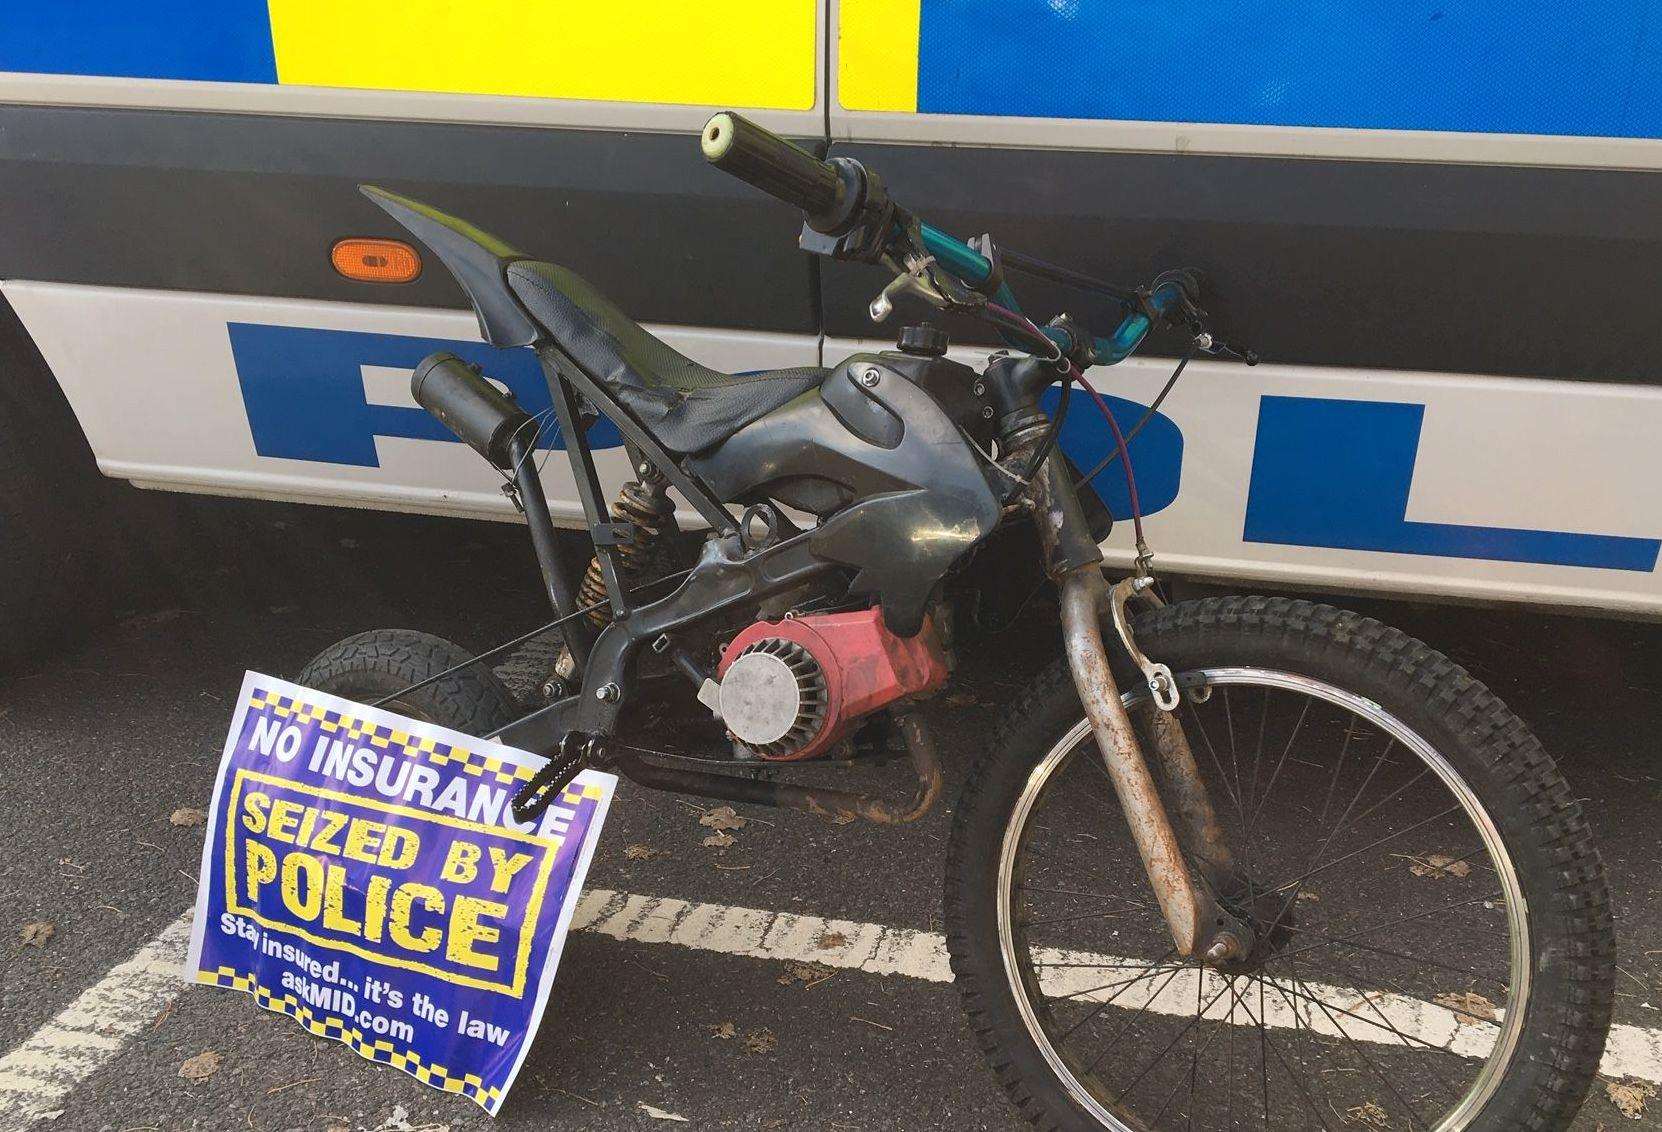 The bike was seized after reports of nuisance riding. Picture: Kent Police (4628355)